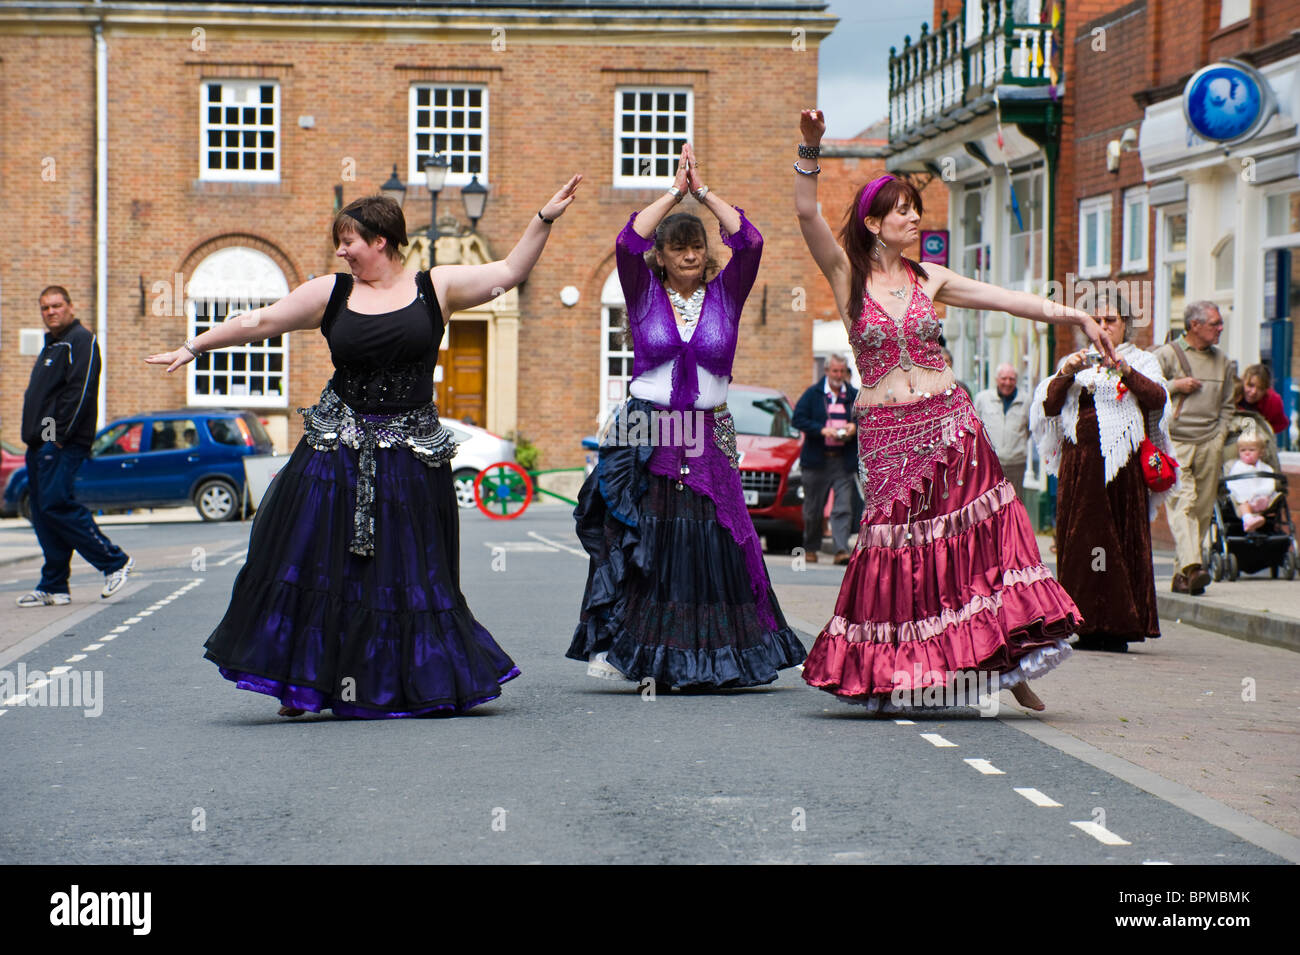 Belly dancers perform in the street during Llandrindod Wells Victorian Festival Powys Mid Wales UK Stock Photo